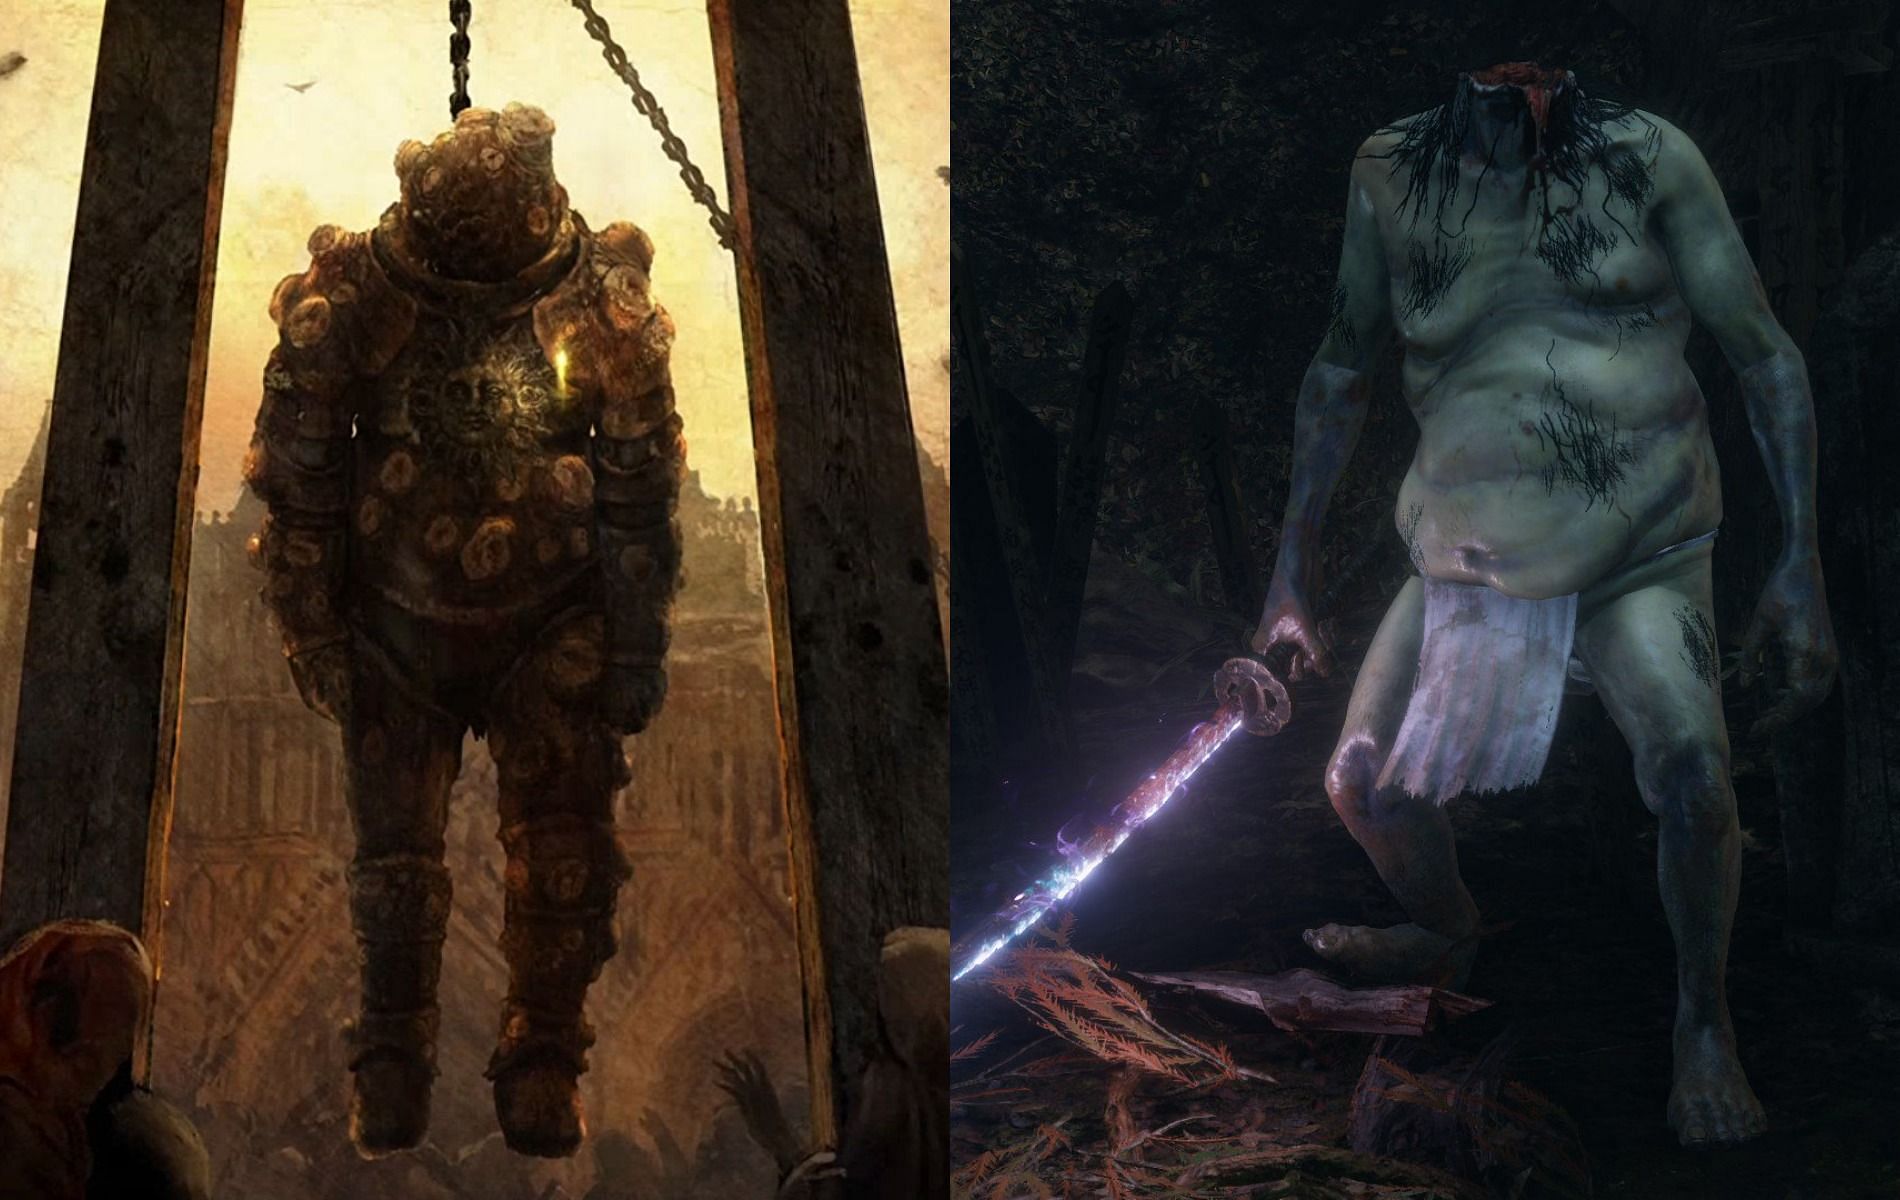 Elden Ring&rsquo;s the Dung Eater is one of the most appalling characters in FromSoftware&#039;s history (Images via Elden Ring)